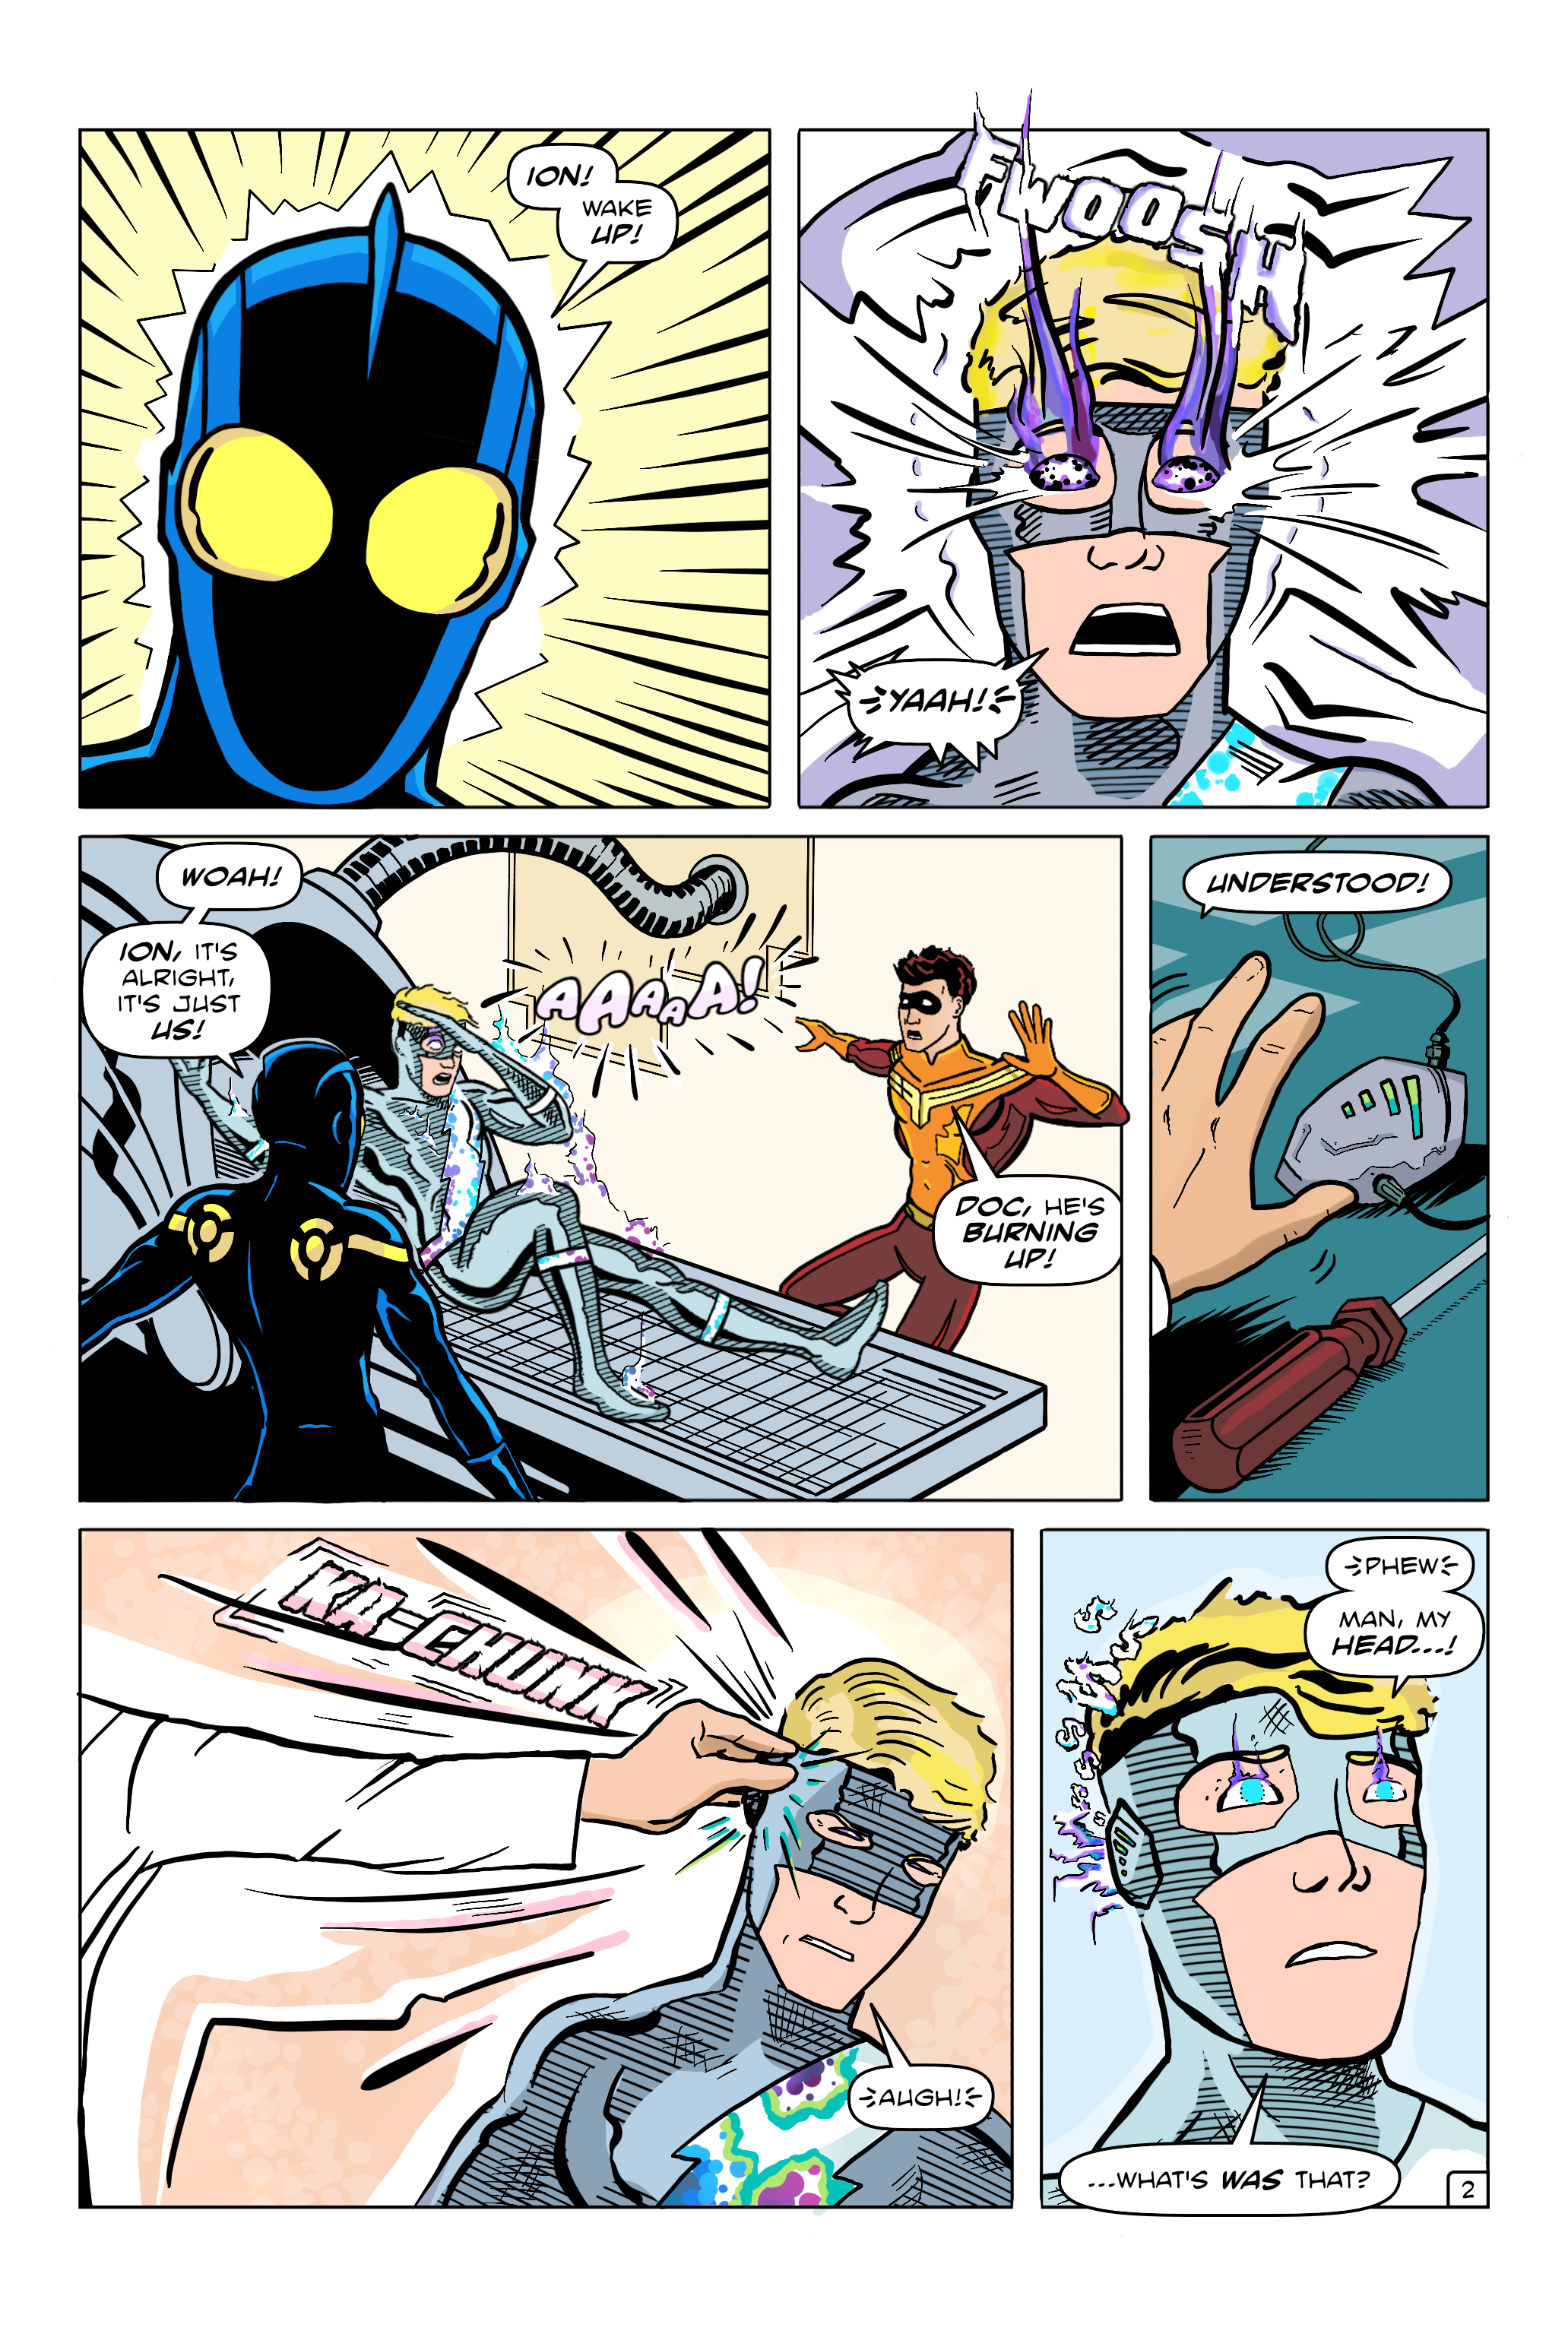 Issue 4 page 2